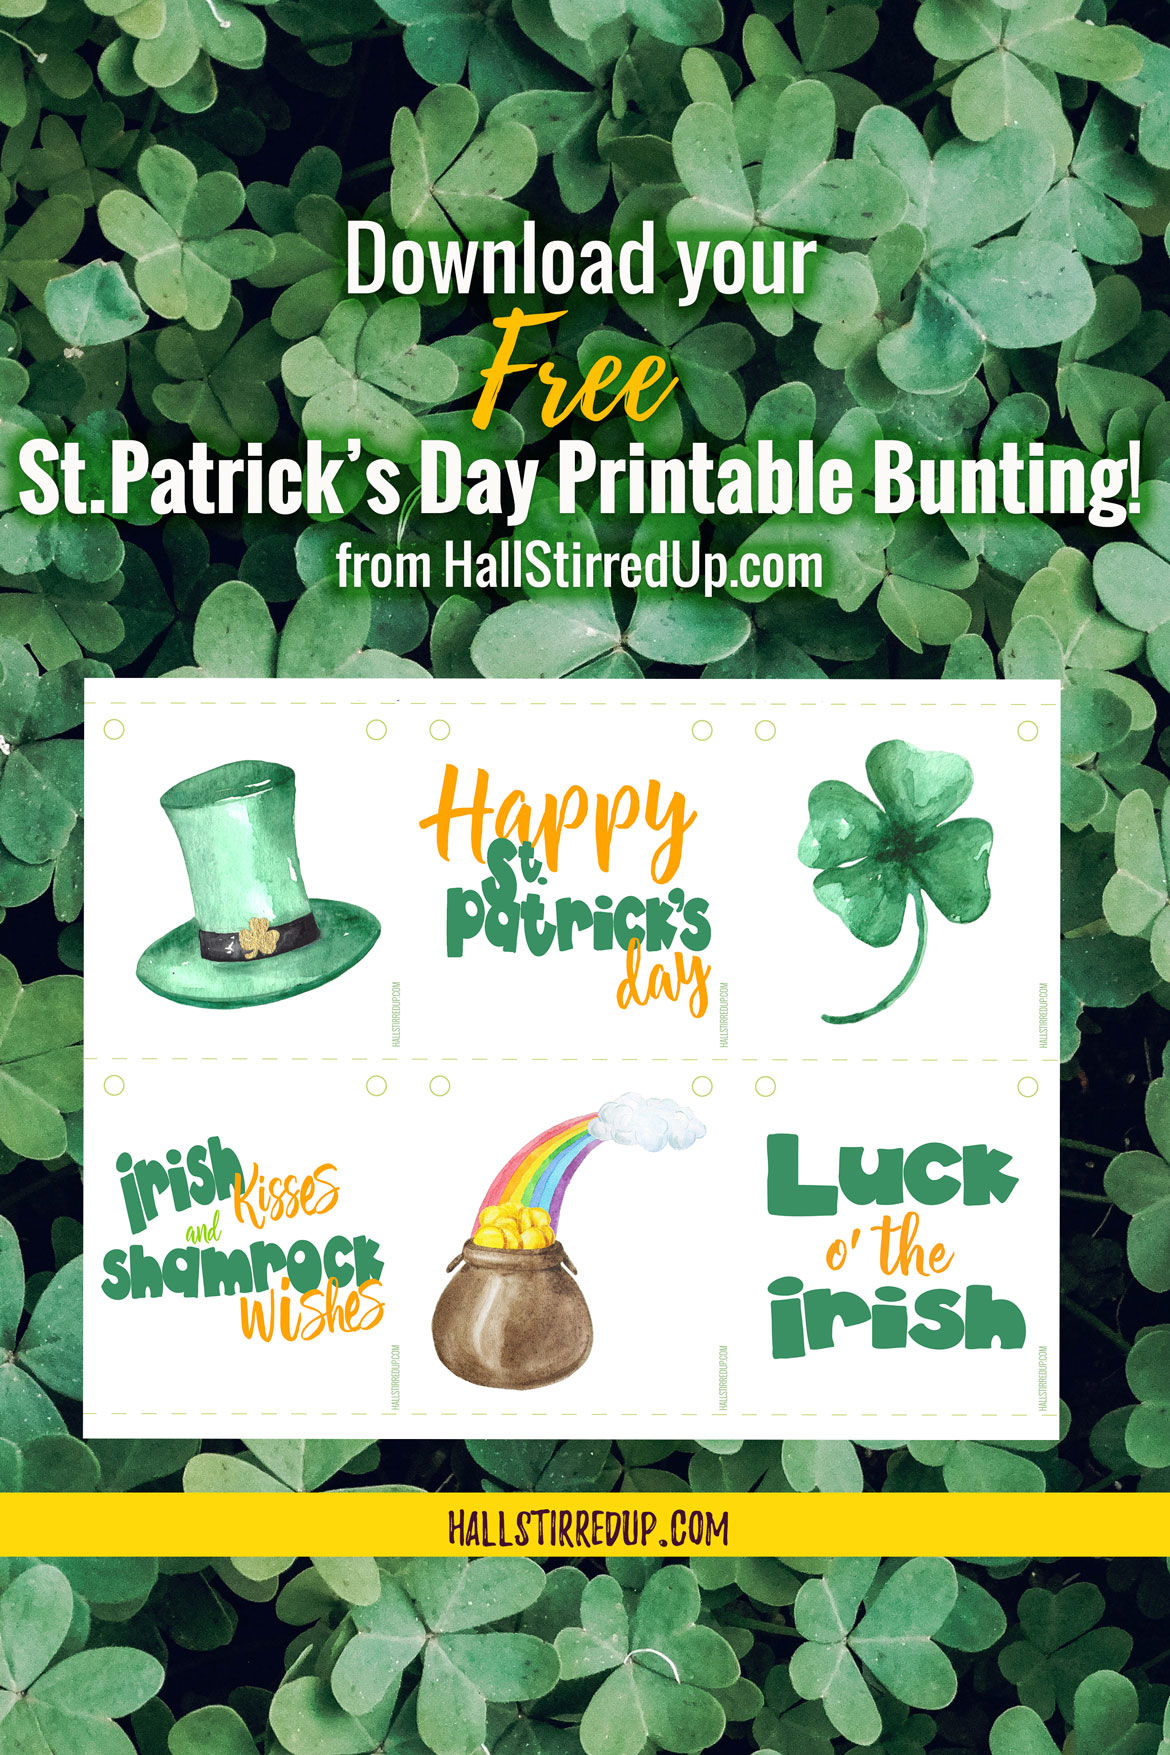 Celebrate St. Patrick's Day with a fun printable bunting!